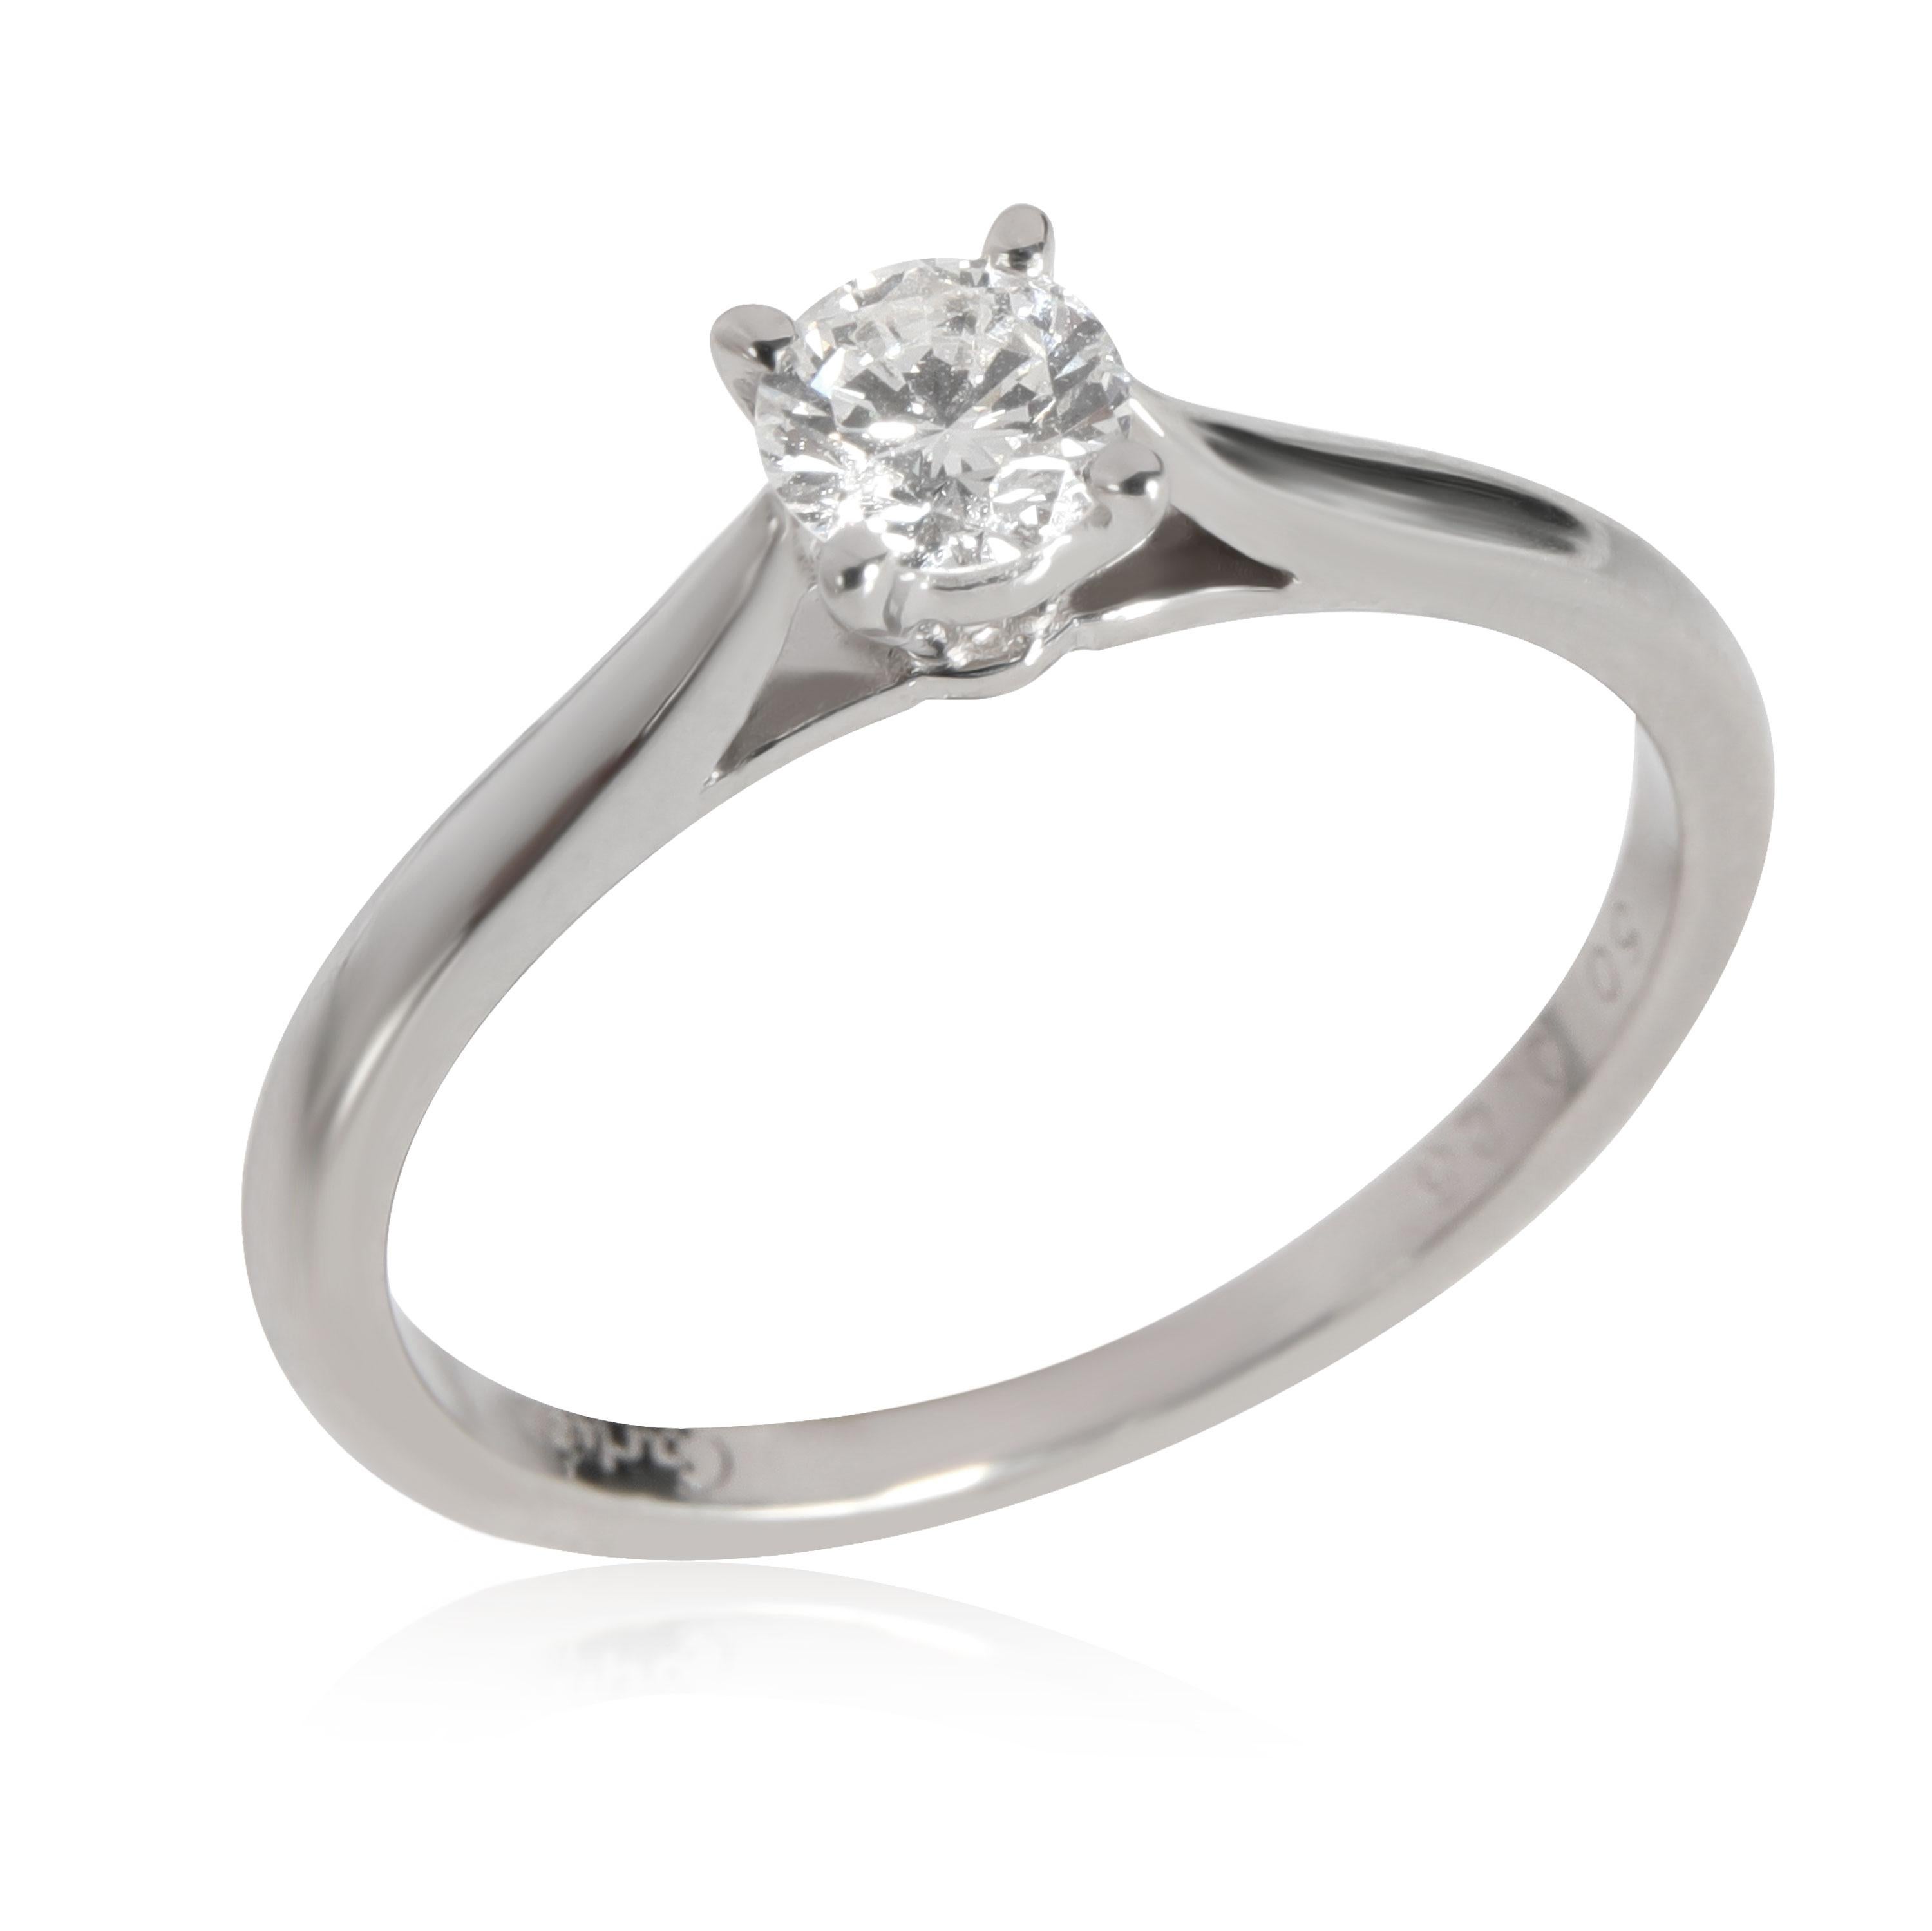 Cartier 1895 Diamond Solitaire Engagement Ring in Platinum F VVS1 0.25 CTW

Retails for 2,890 USD. In excellent condition and recently polished. Cartier ring size is 50.

CENTER STONE INFORMATION
Center Stone 1 Type: Diamond
Center Stone Weight 1